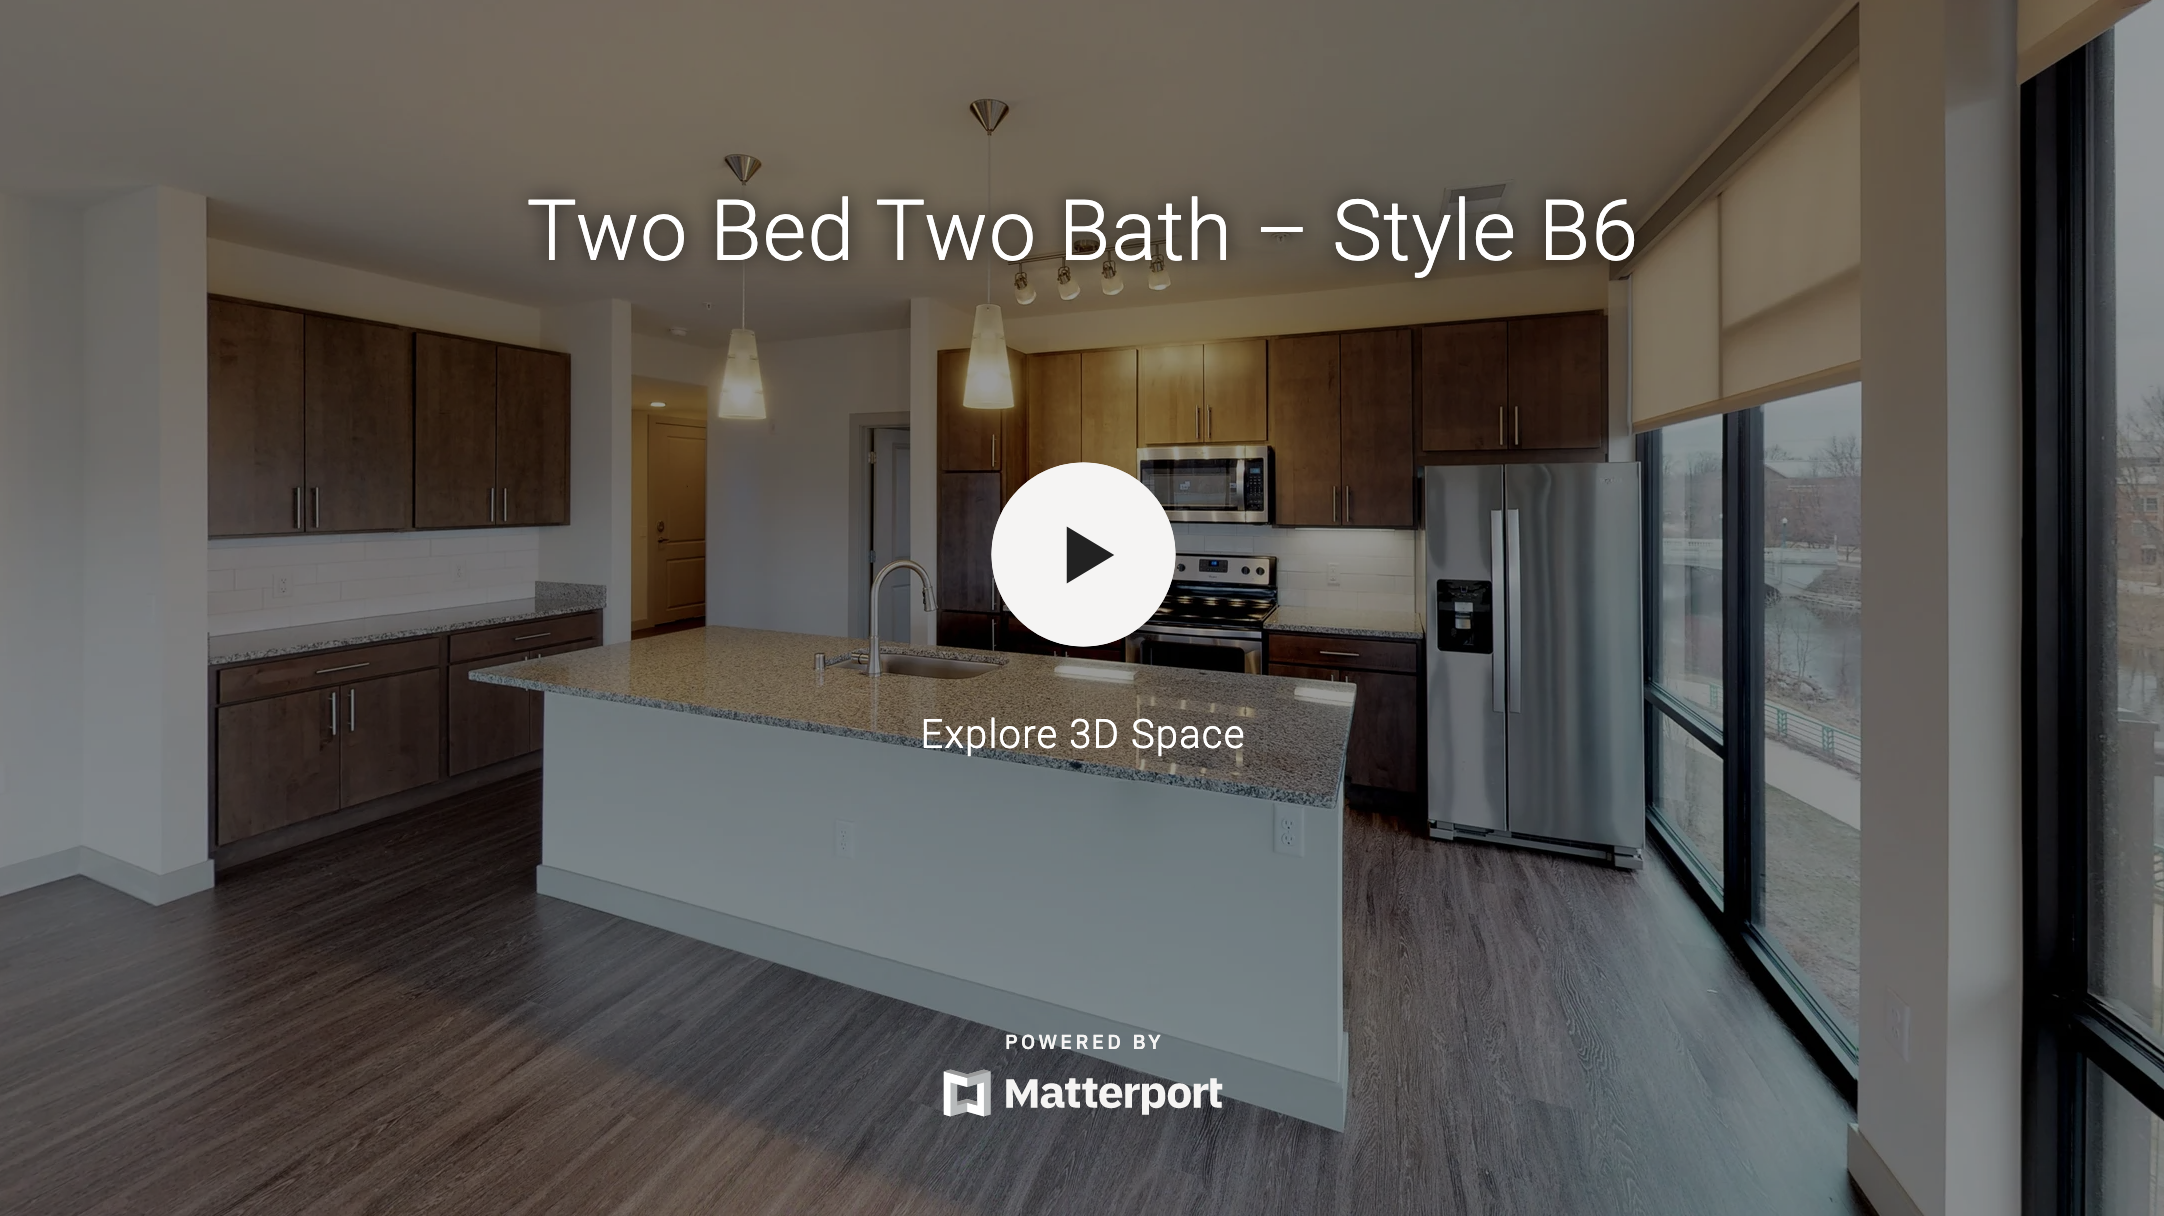 Two Bed Two Bath – Style B6